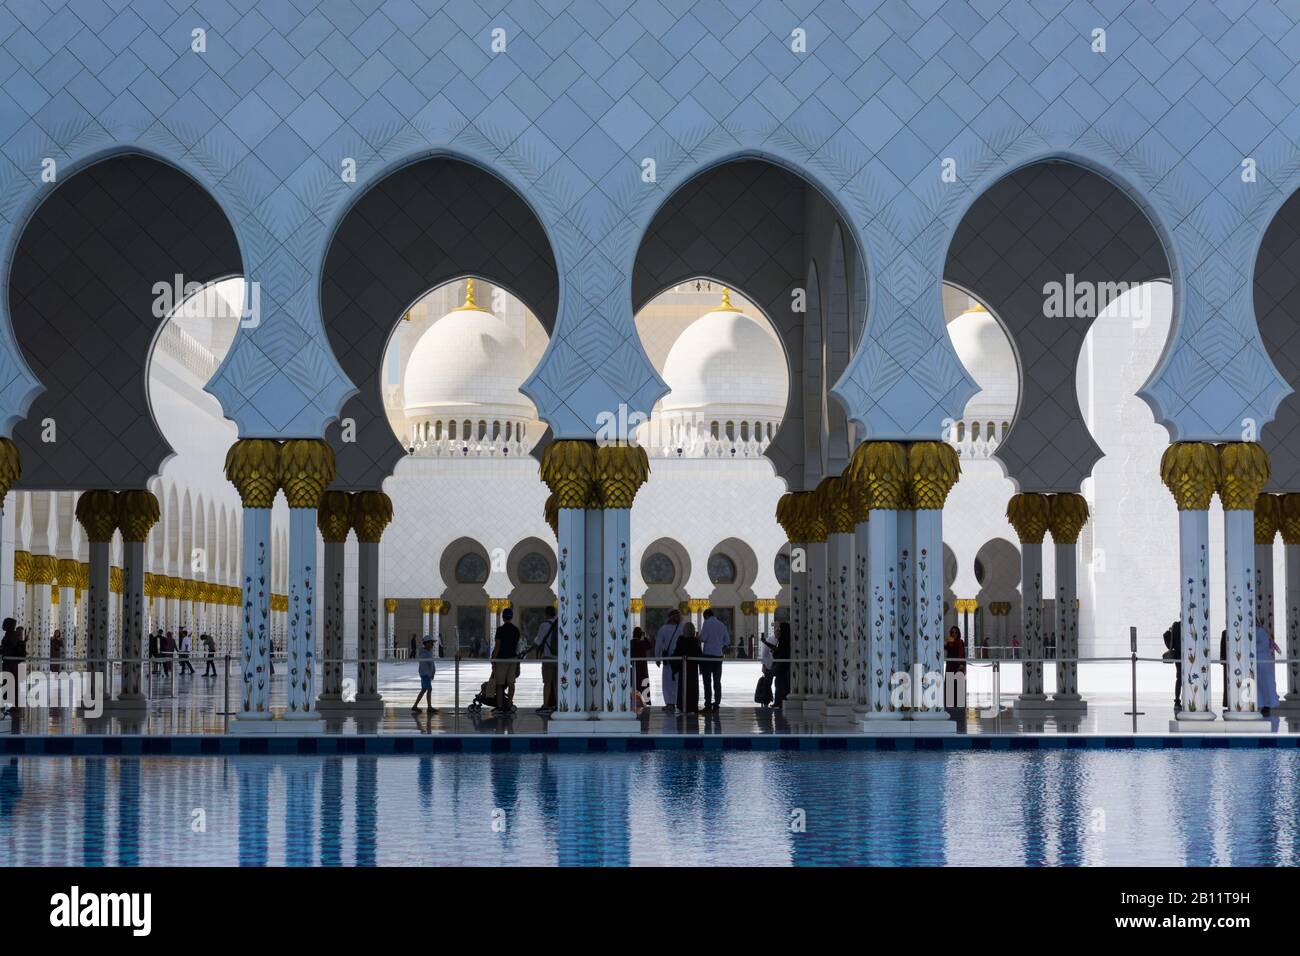 Brilliant white arches and domes of the Sheik Zayed Grand Mosque in Abu Dhabi Stock Photo